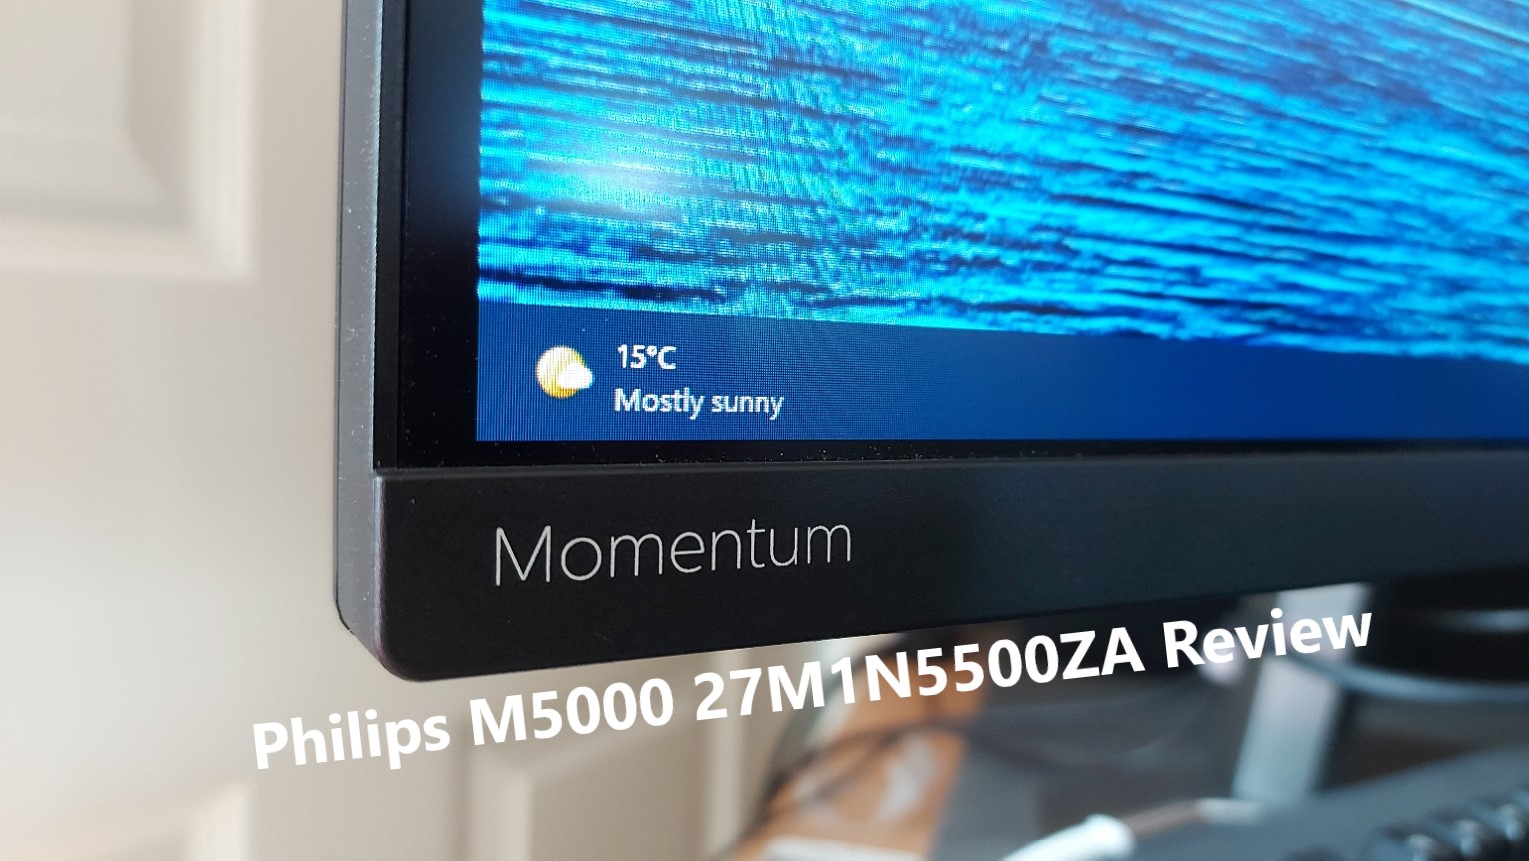 Philips Momentum 5000 27M1N5500ZA Review - Total Gaming Addicts